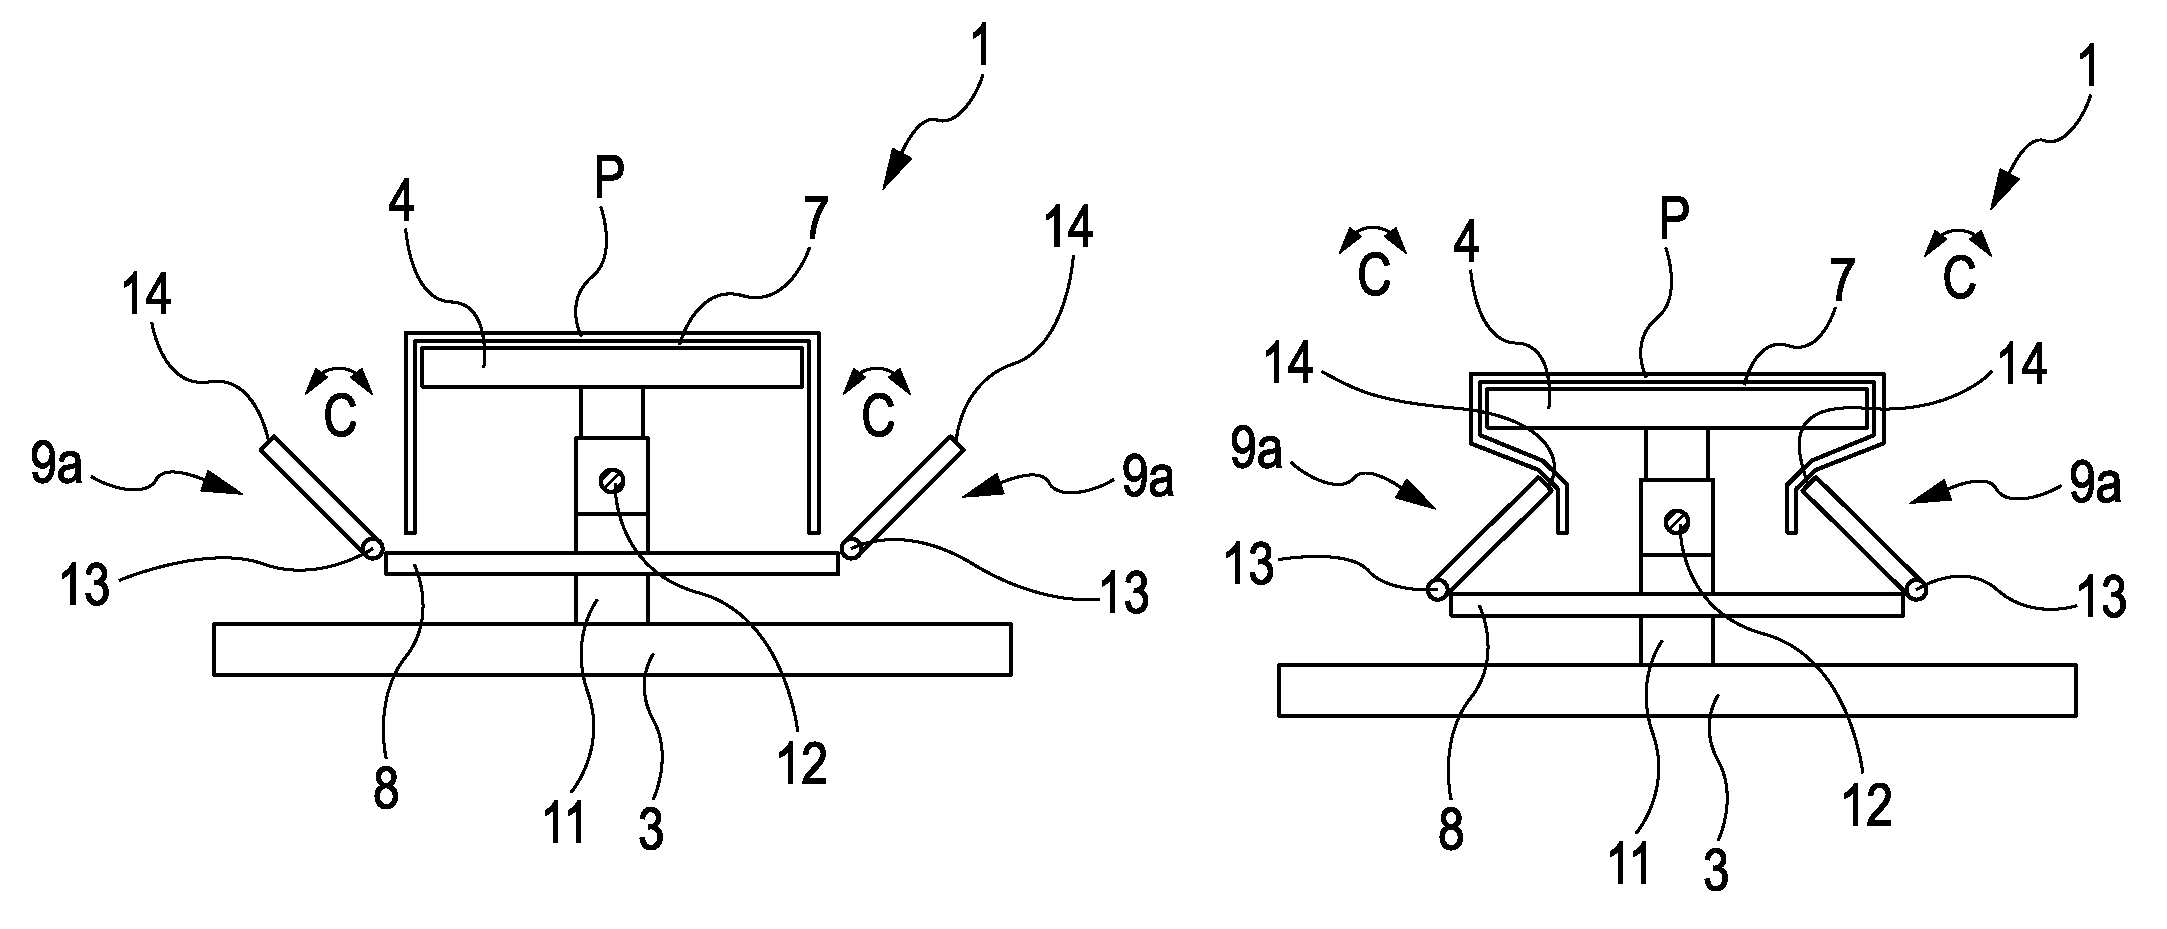 Recording apparatus and method of manufacturing recorded matter